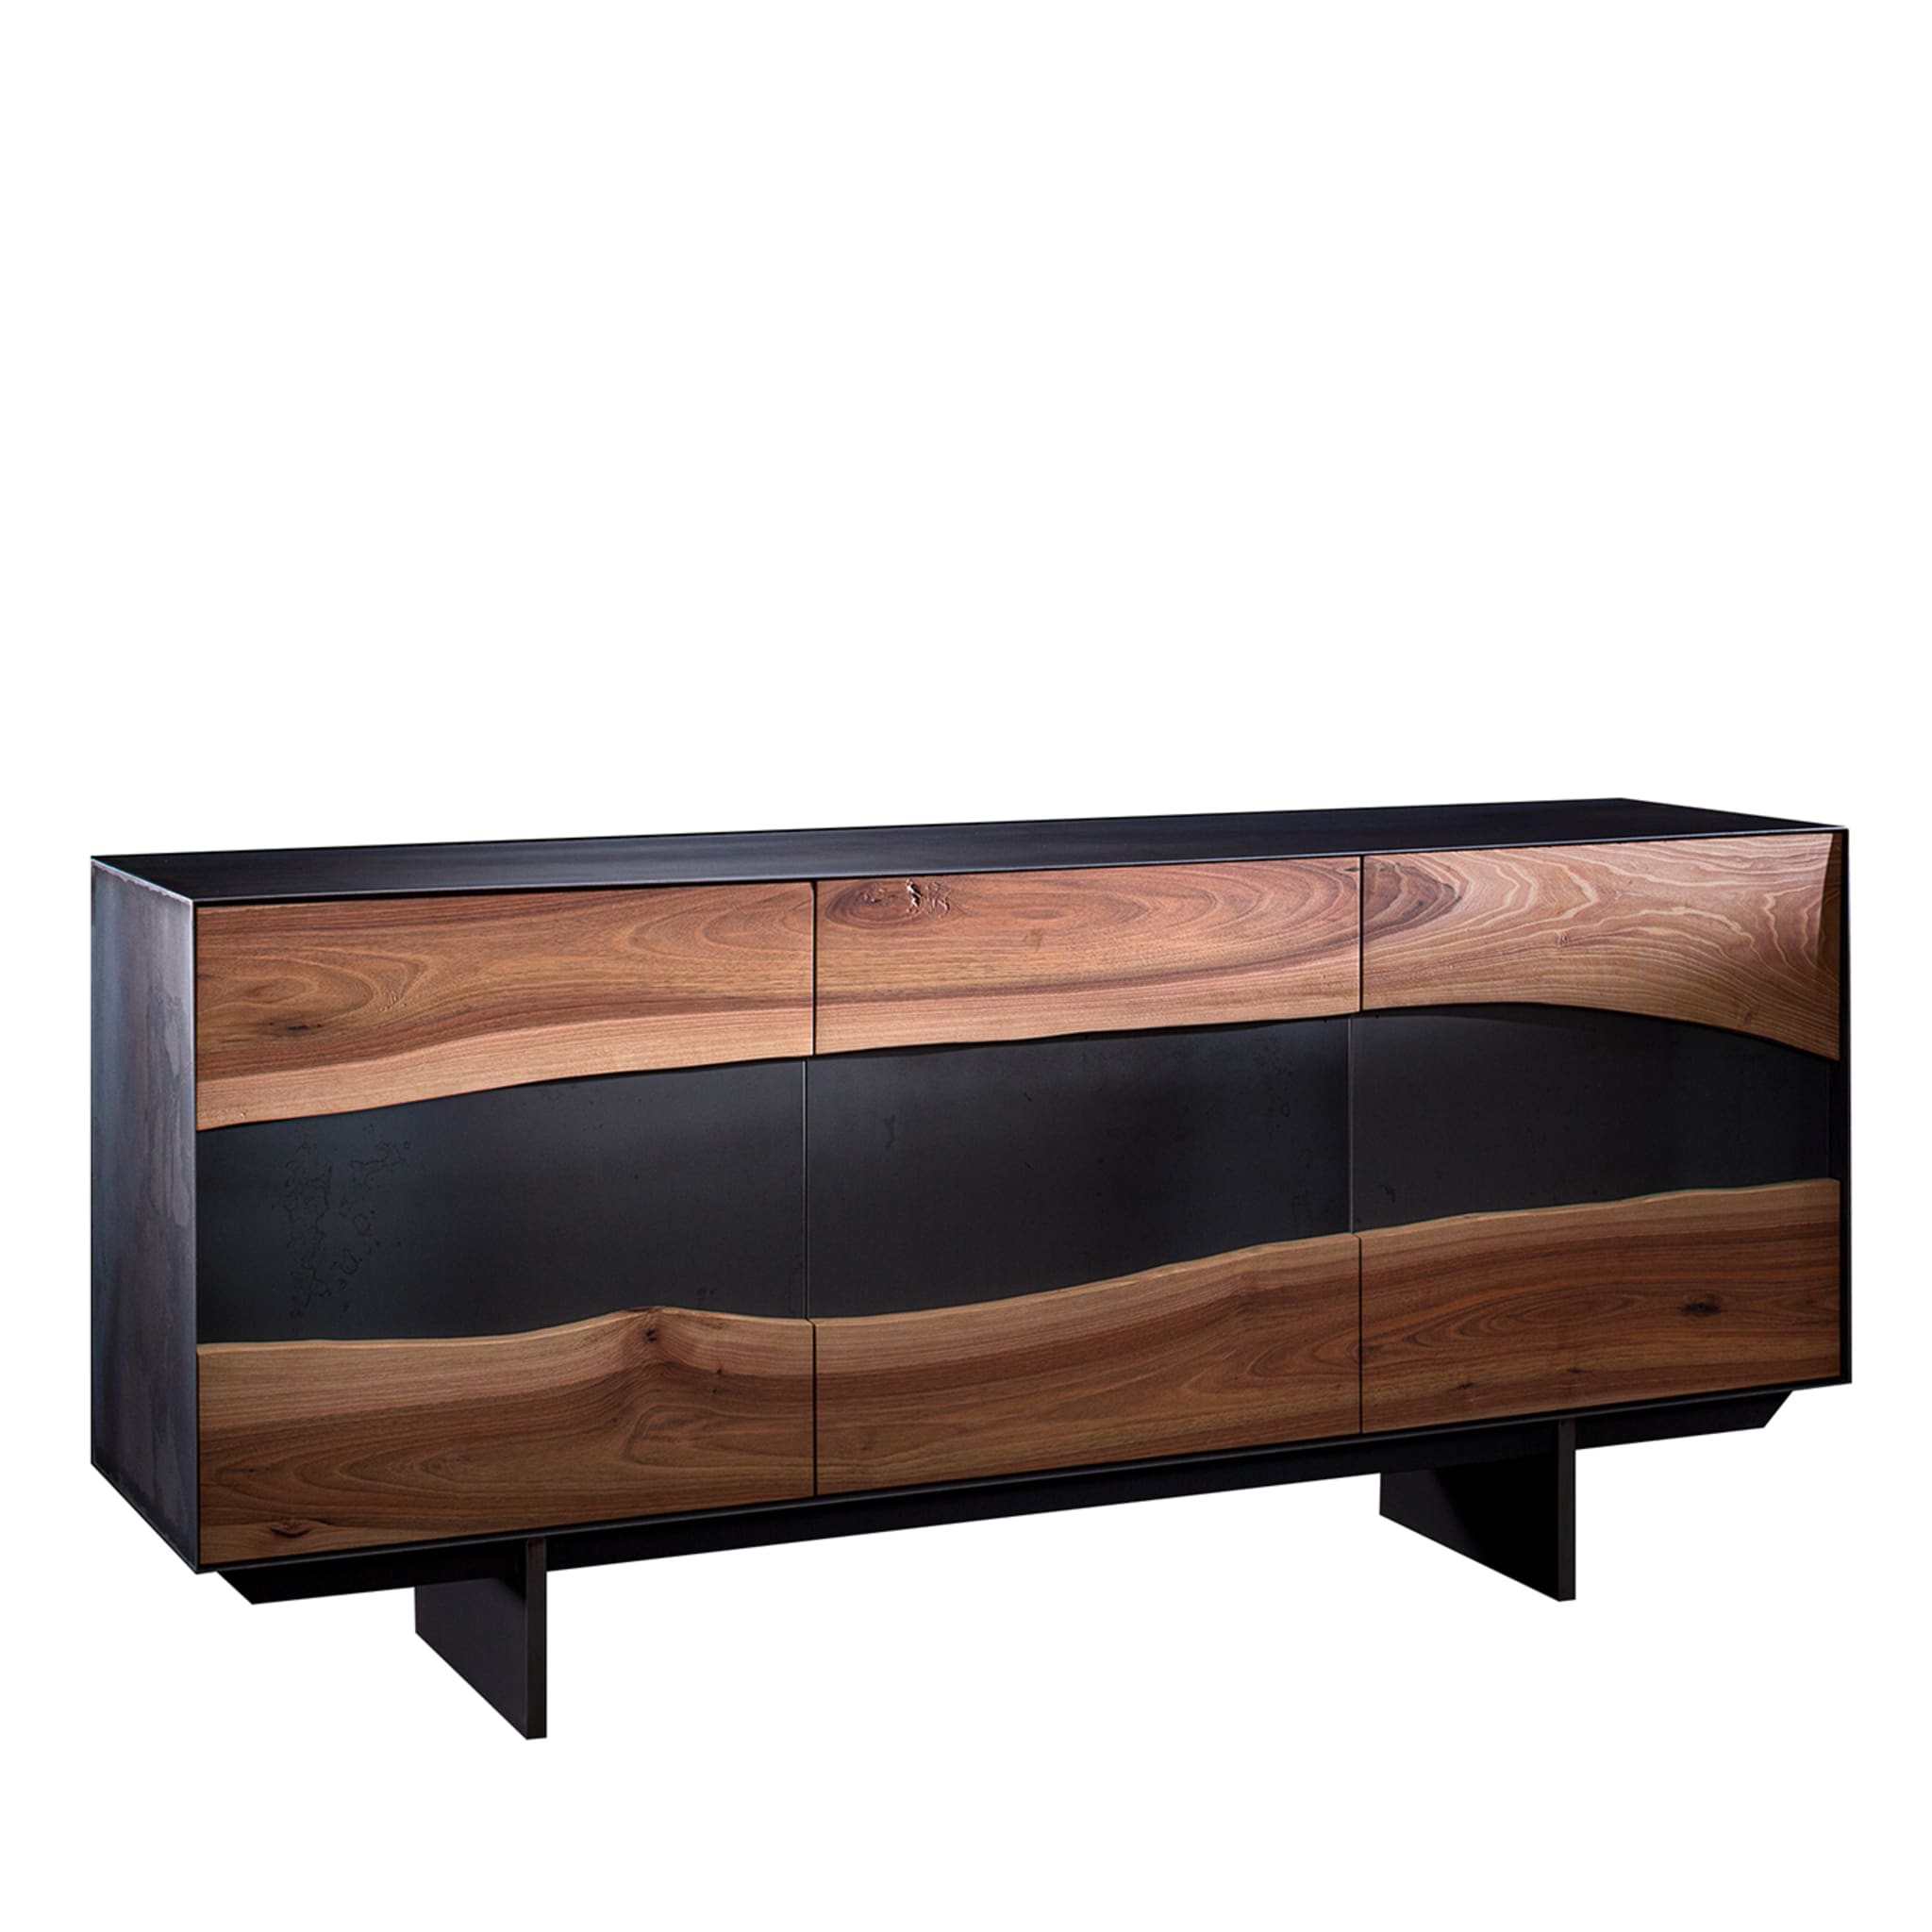 Walnut and steel sideboard #1 - Main view